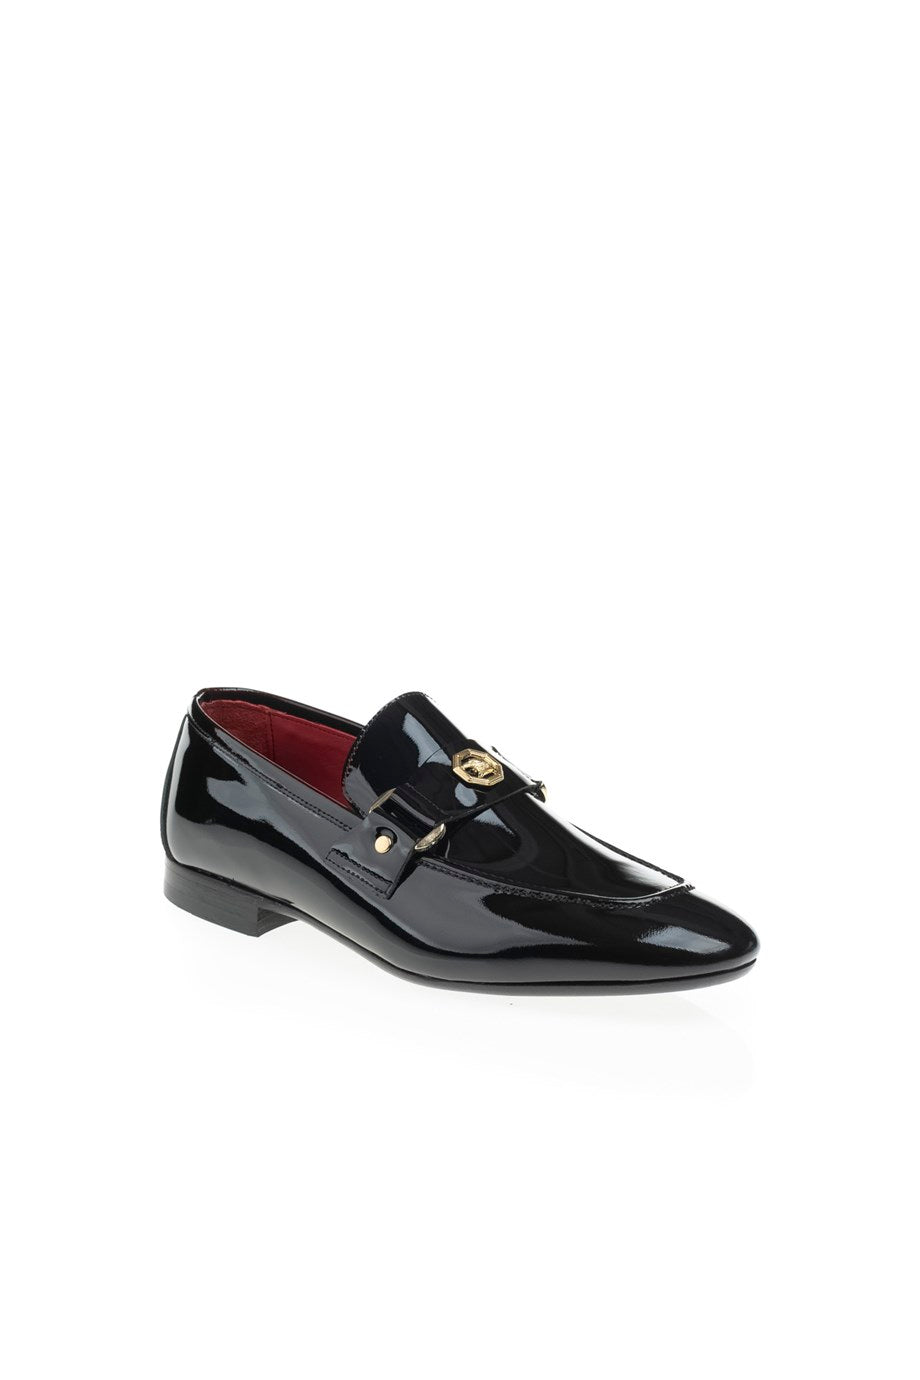 Neolite Sole Patent Leather Shoes - MENSTYLEWITH